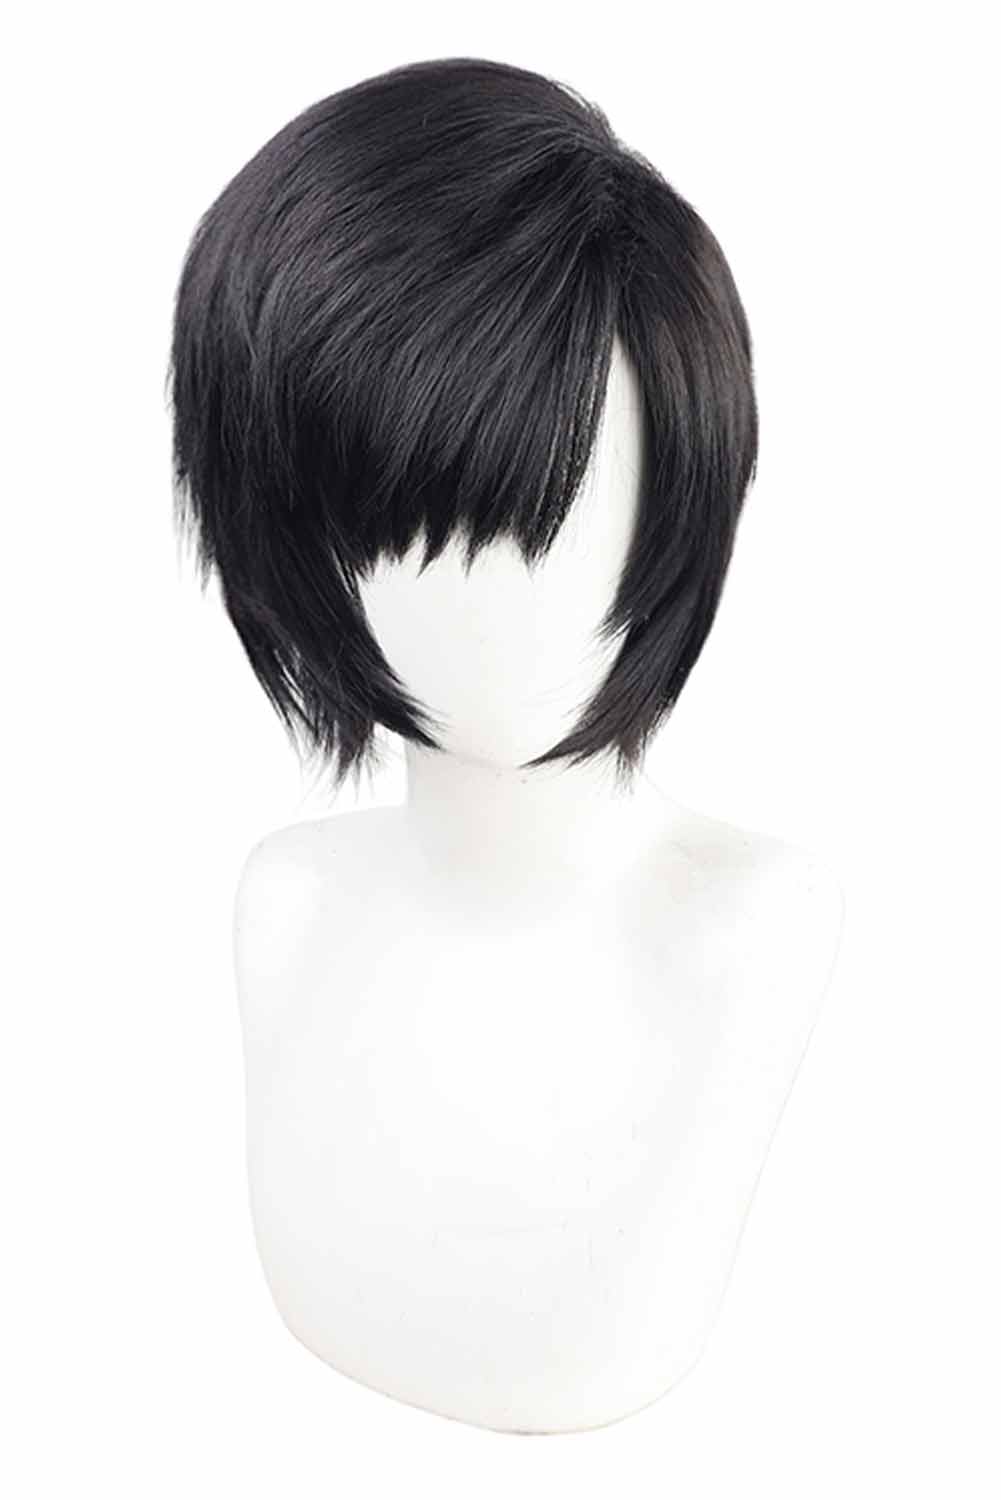 Game Final Fantasy VII Yuffie Kisaragi Cosplay Wig Heat Resistant Synthetic Hair Halloween Costume Accessories